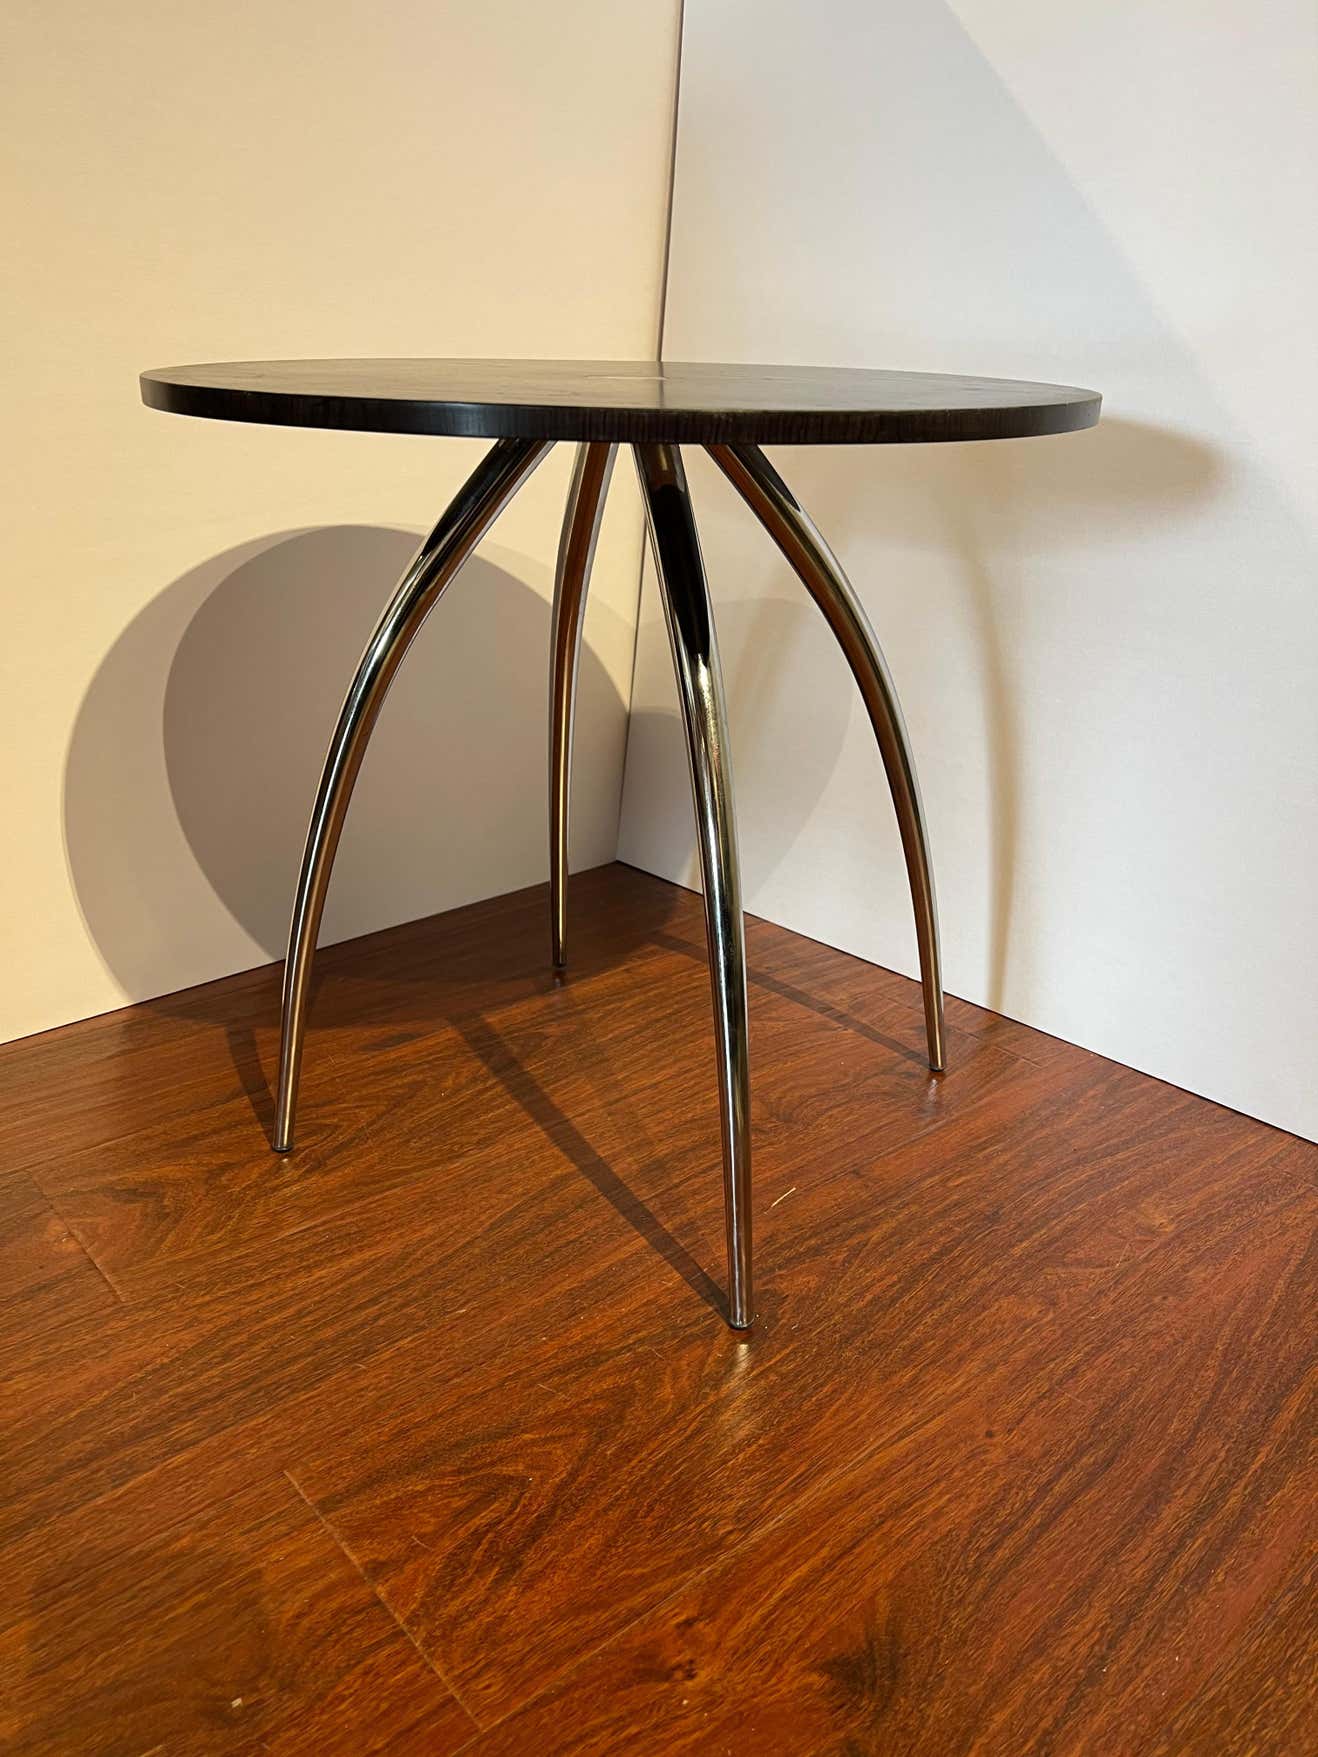 Walnut Wood and Chrome Magis Lyra Side Tables - A Pair